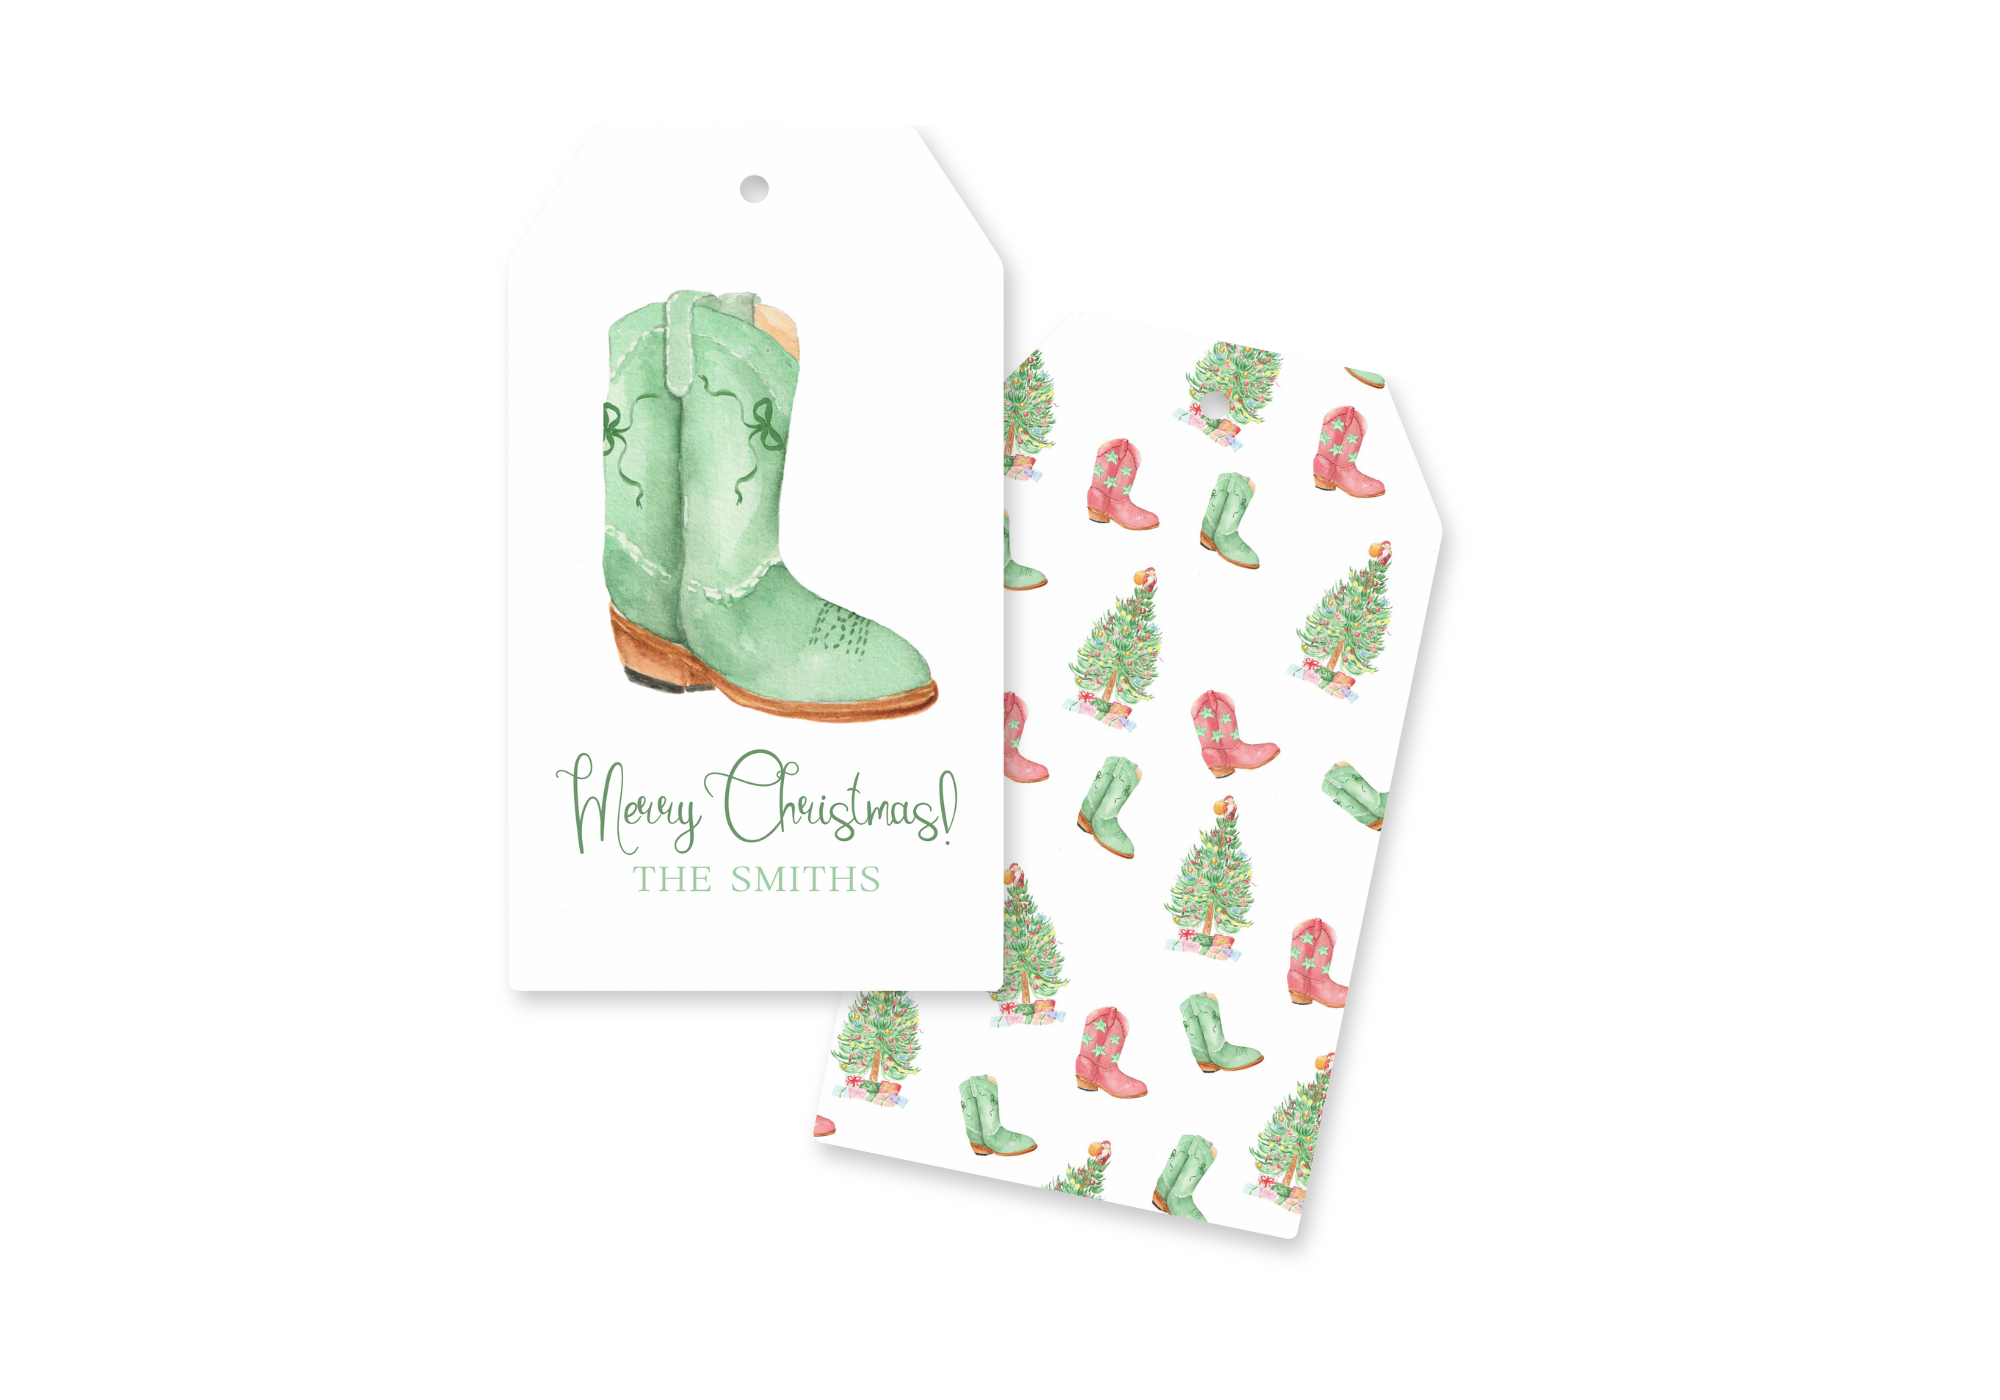 Cowboy Boots and Hats in Pink Wrapping Paper by Camila